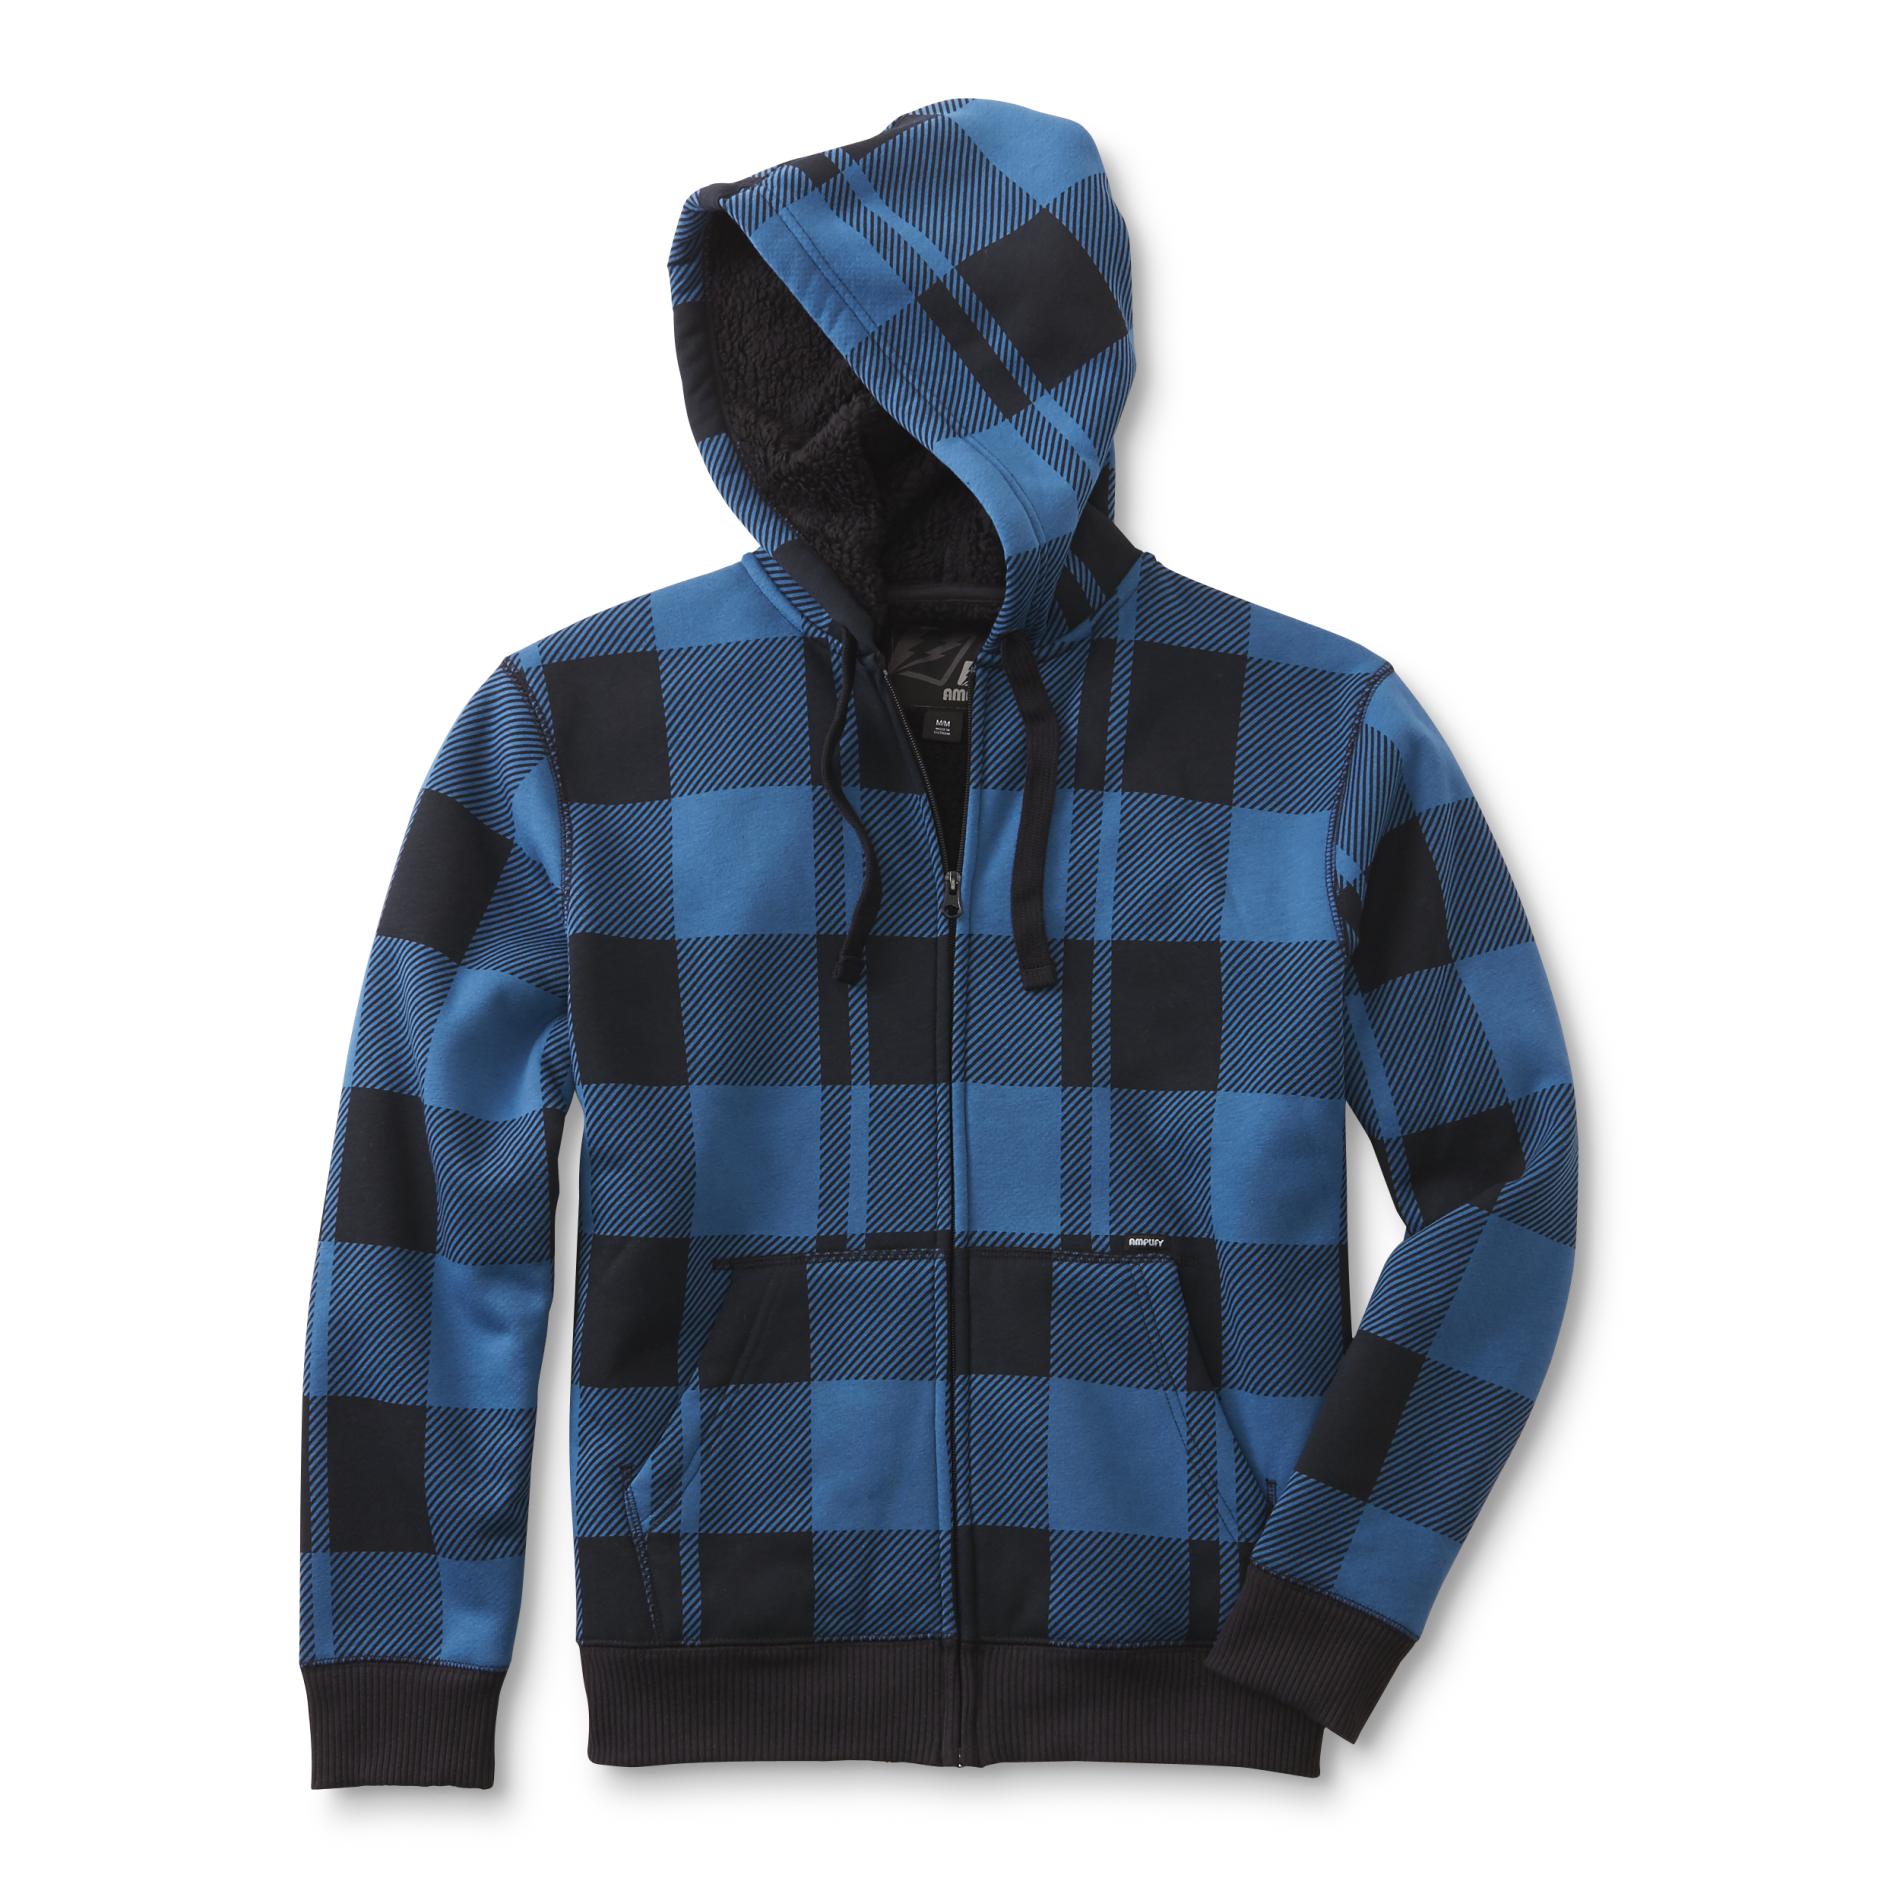 Amplify Young Men's Hoodie Jacket - Plaid